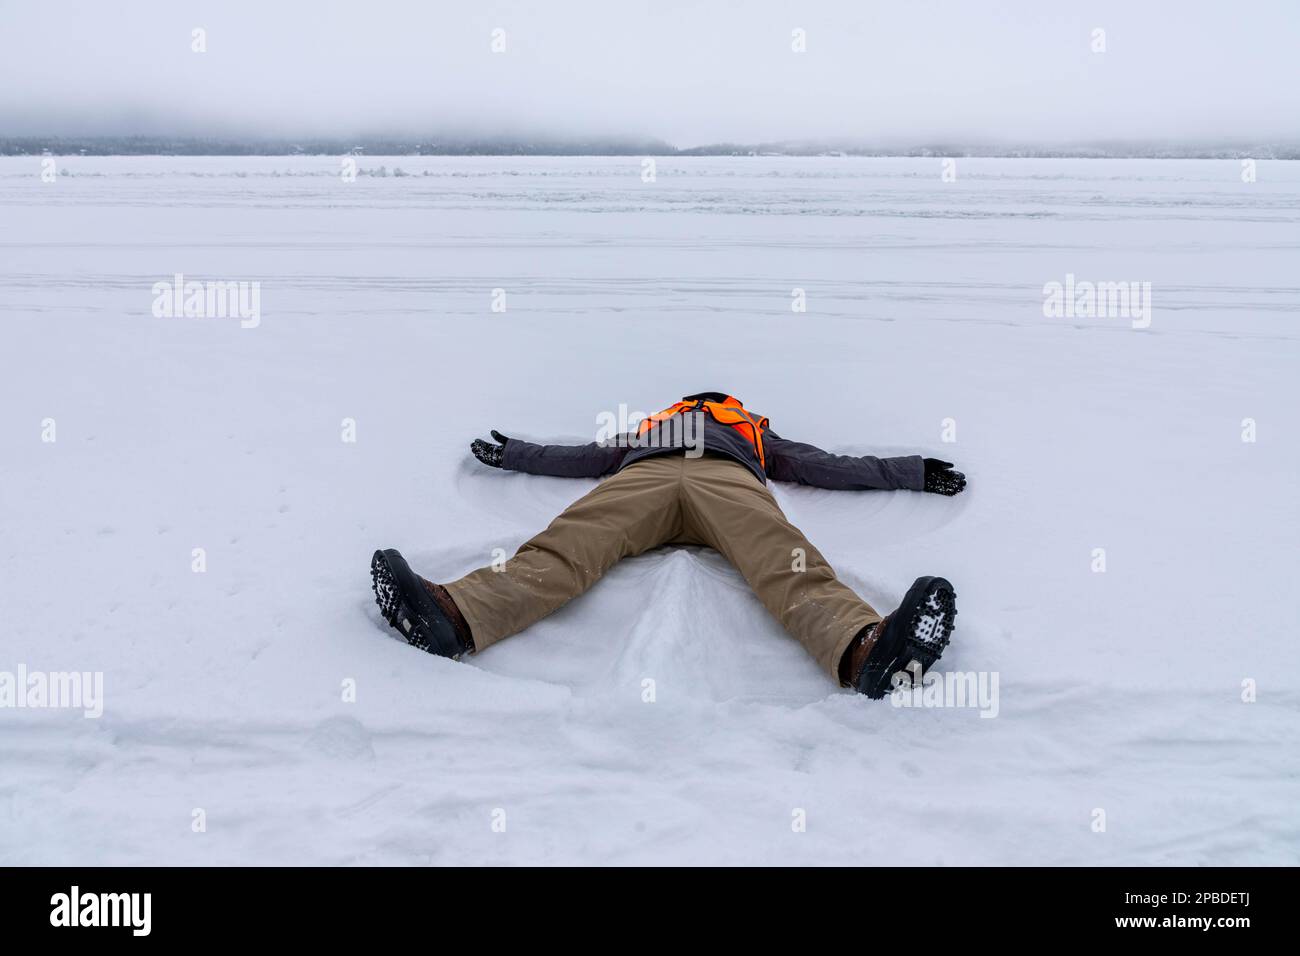 The making of a snow angel on Gunflint Lake in Northern Minnesota on the Canadian Border edge of the Boundary Water Canoe Area Wilderness frozen lake Stock Photo